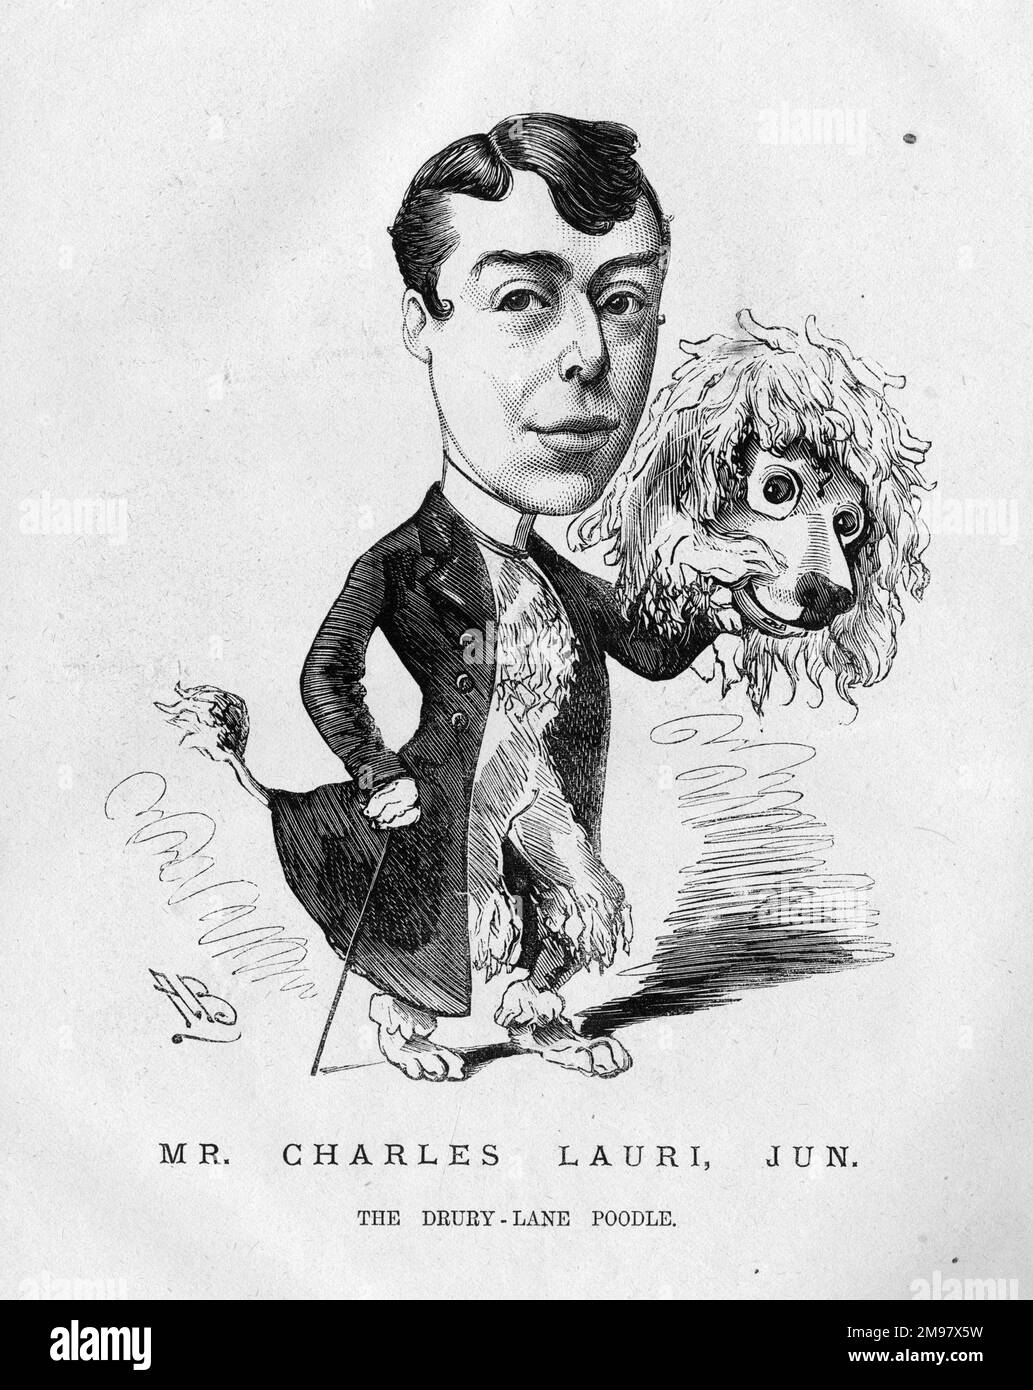 Cartoon of Charles Lauri Junior -- The Drury Lane Poodle. He was a pantomime performer who specialised in animal roles. He studied animal movements in great detail in order to make his performances look authentic. Stock Photo